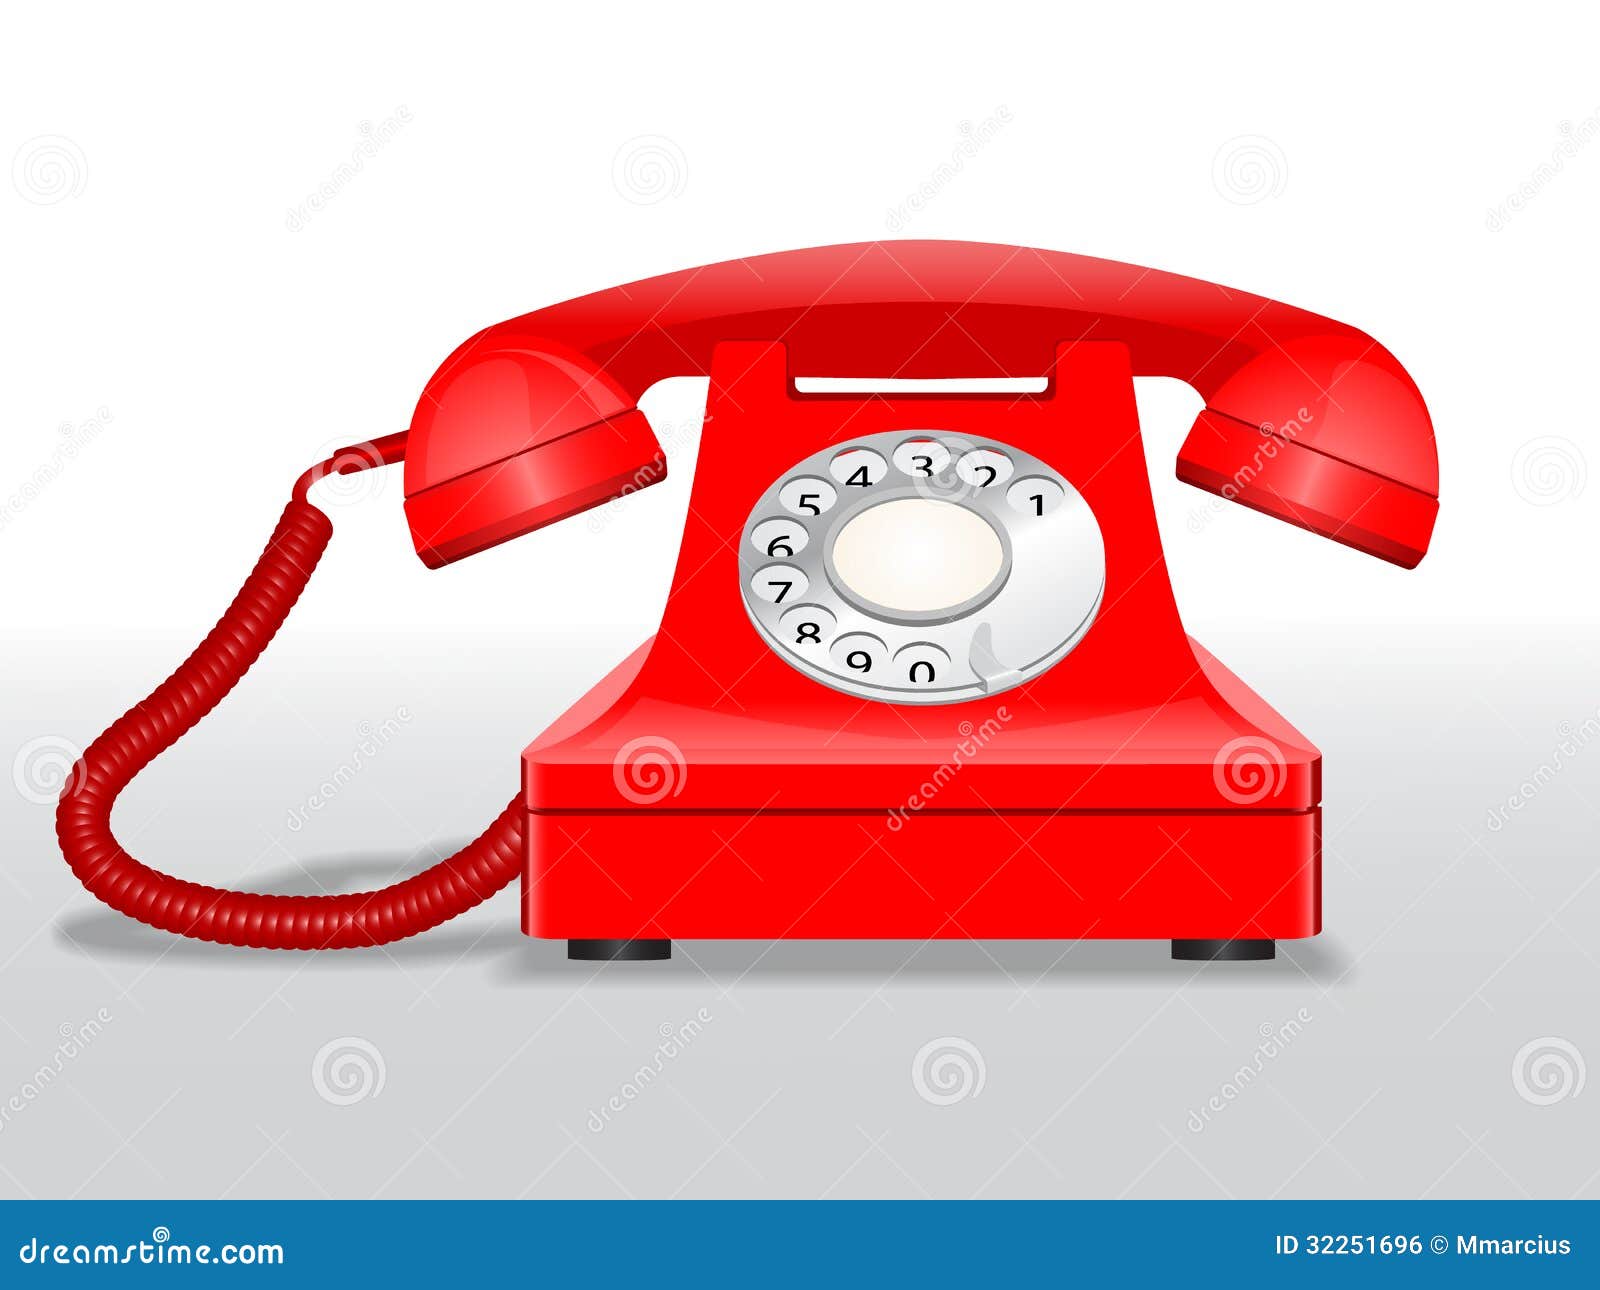 vector free download telephone - photo #37